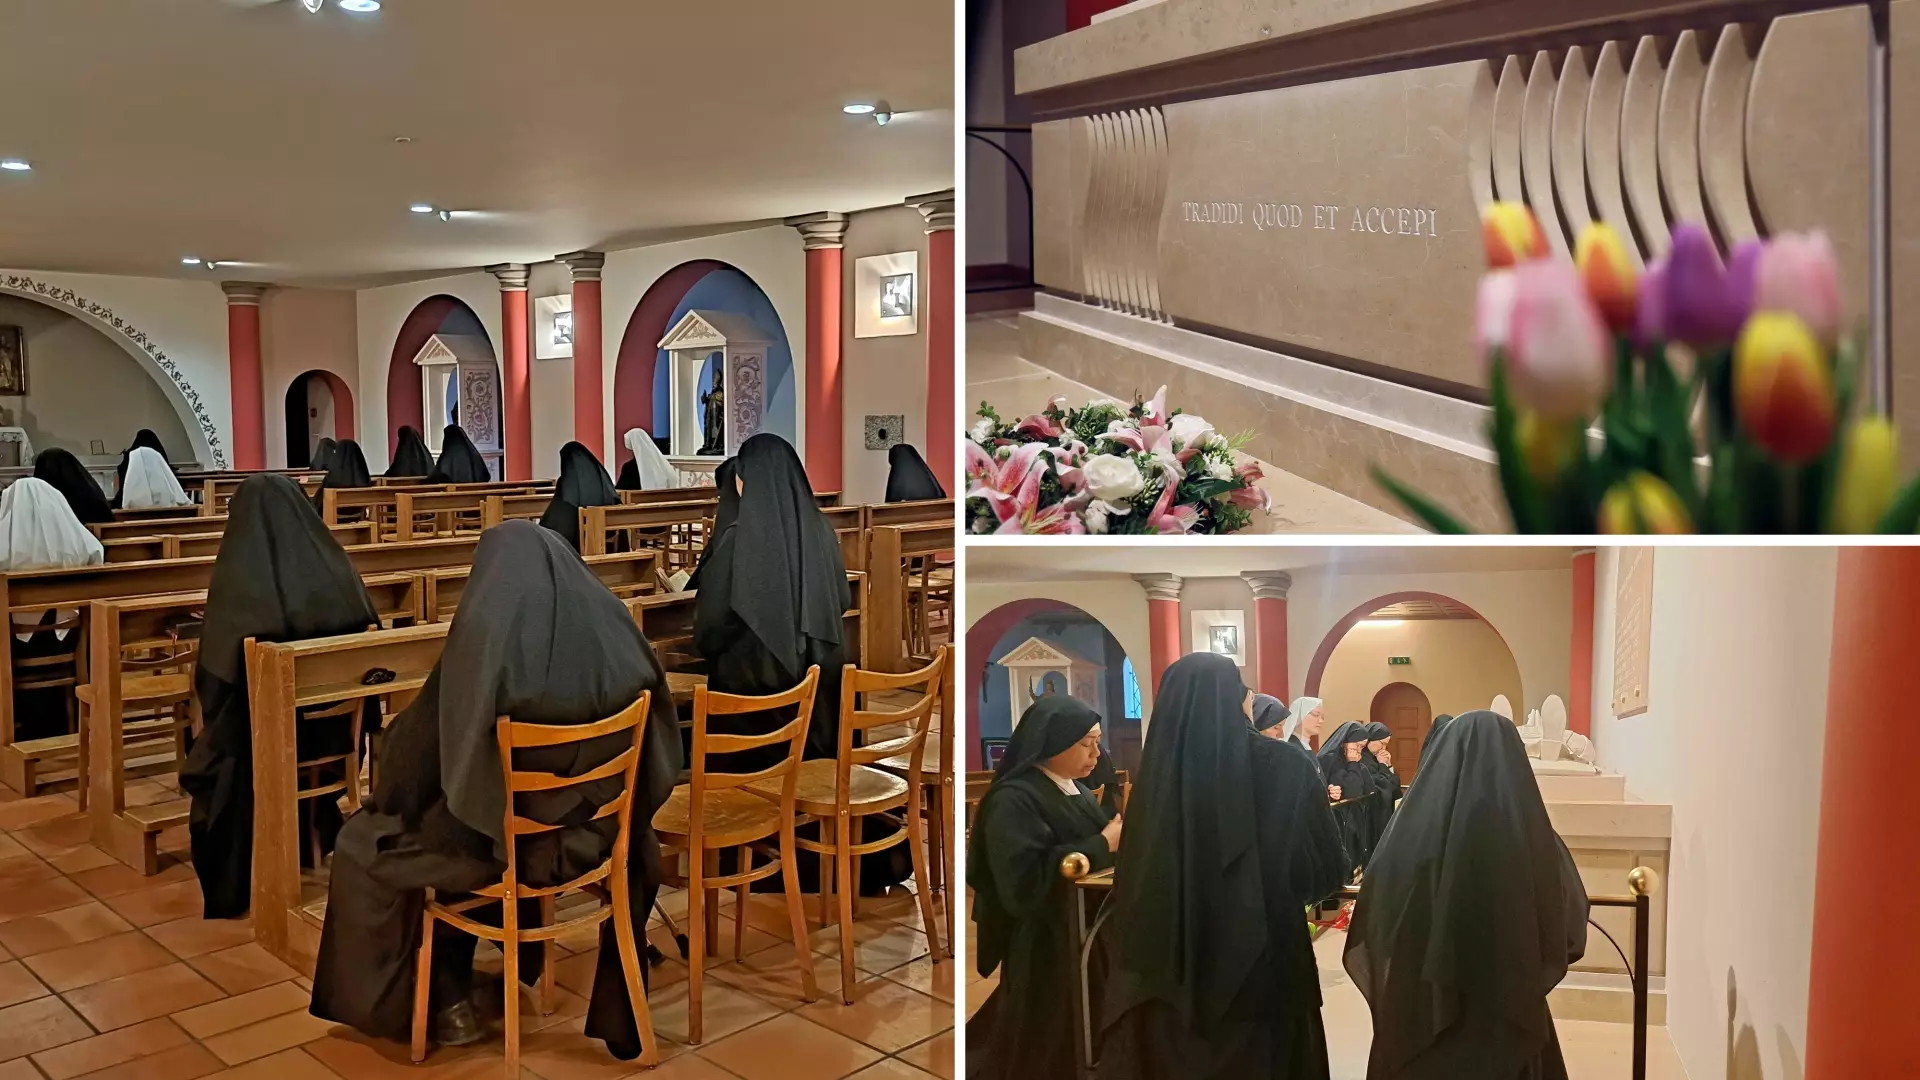 The Sisters pay their respects in turns before the tomb of Archbishop Lefebvre, cofounder of their Congregation.